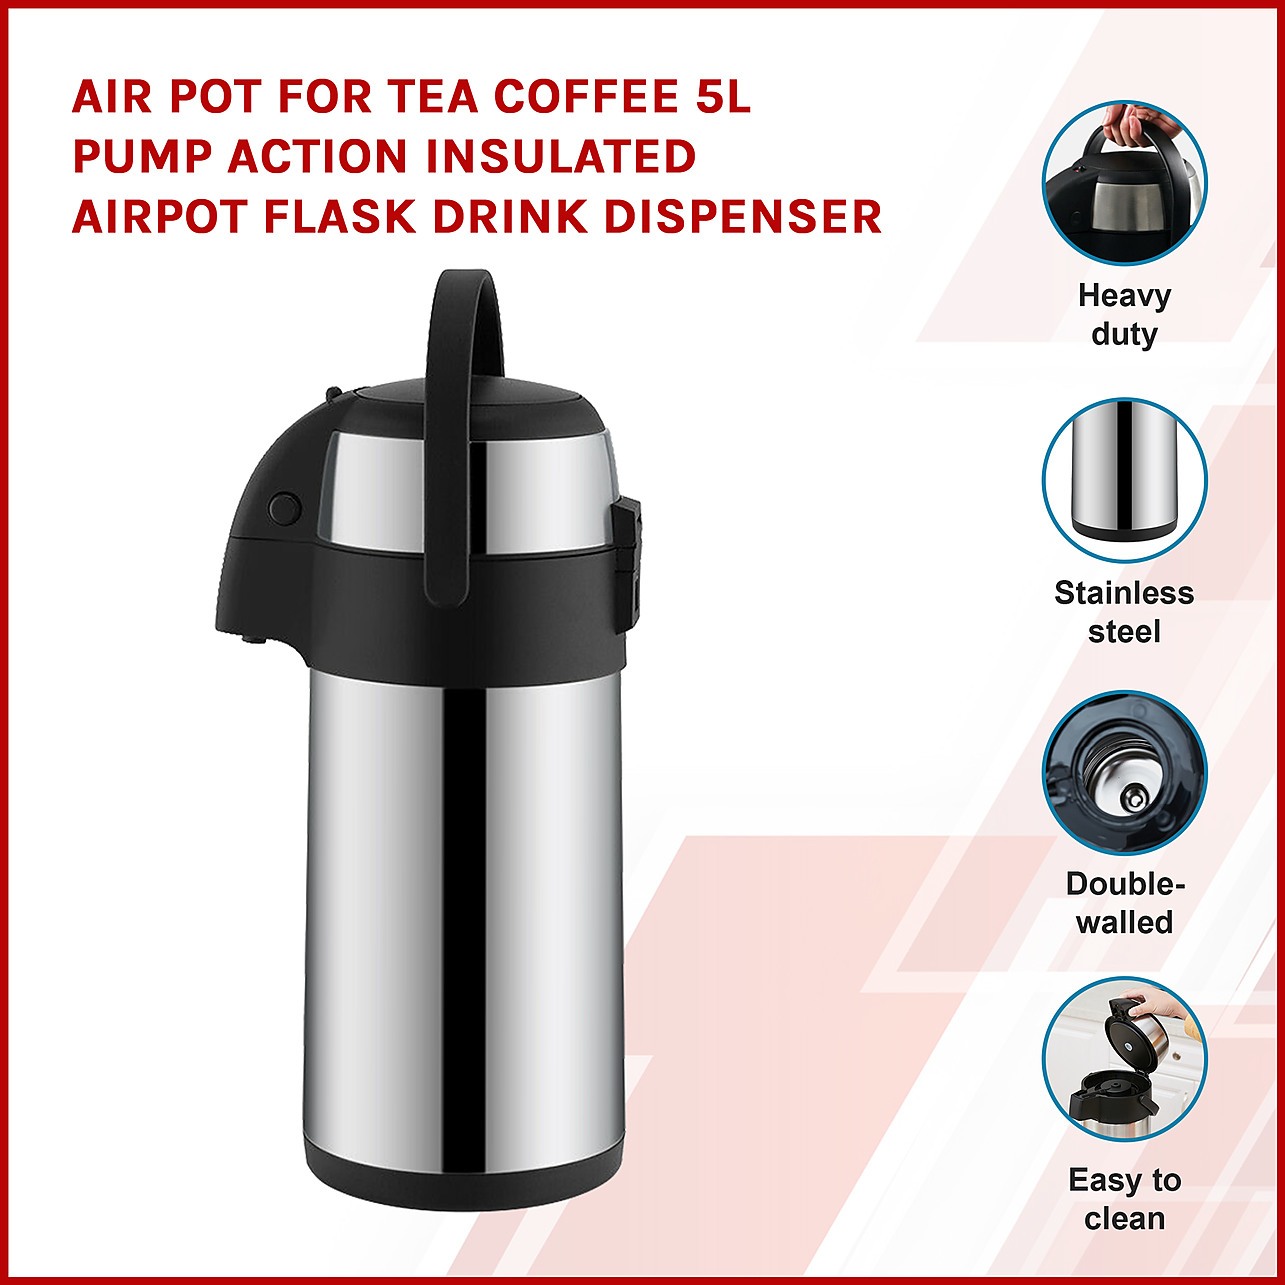 Air Pot for Tea Coffee 5L Pump Action Insulated Airpot Flask Drink Dispenser  - Home & Lifestyle > Kitchenware